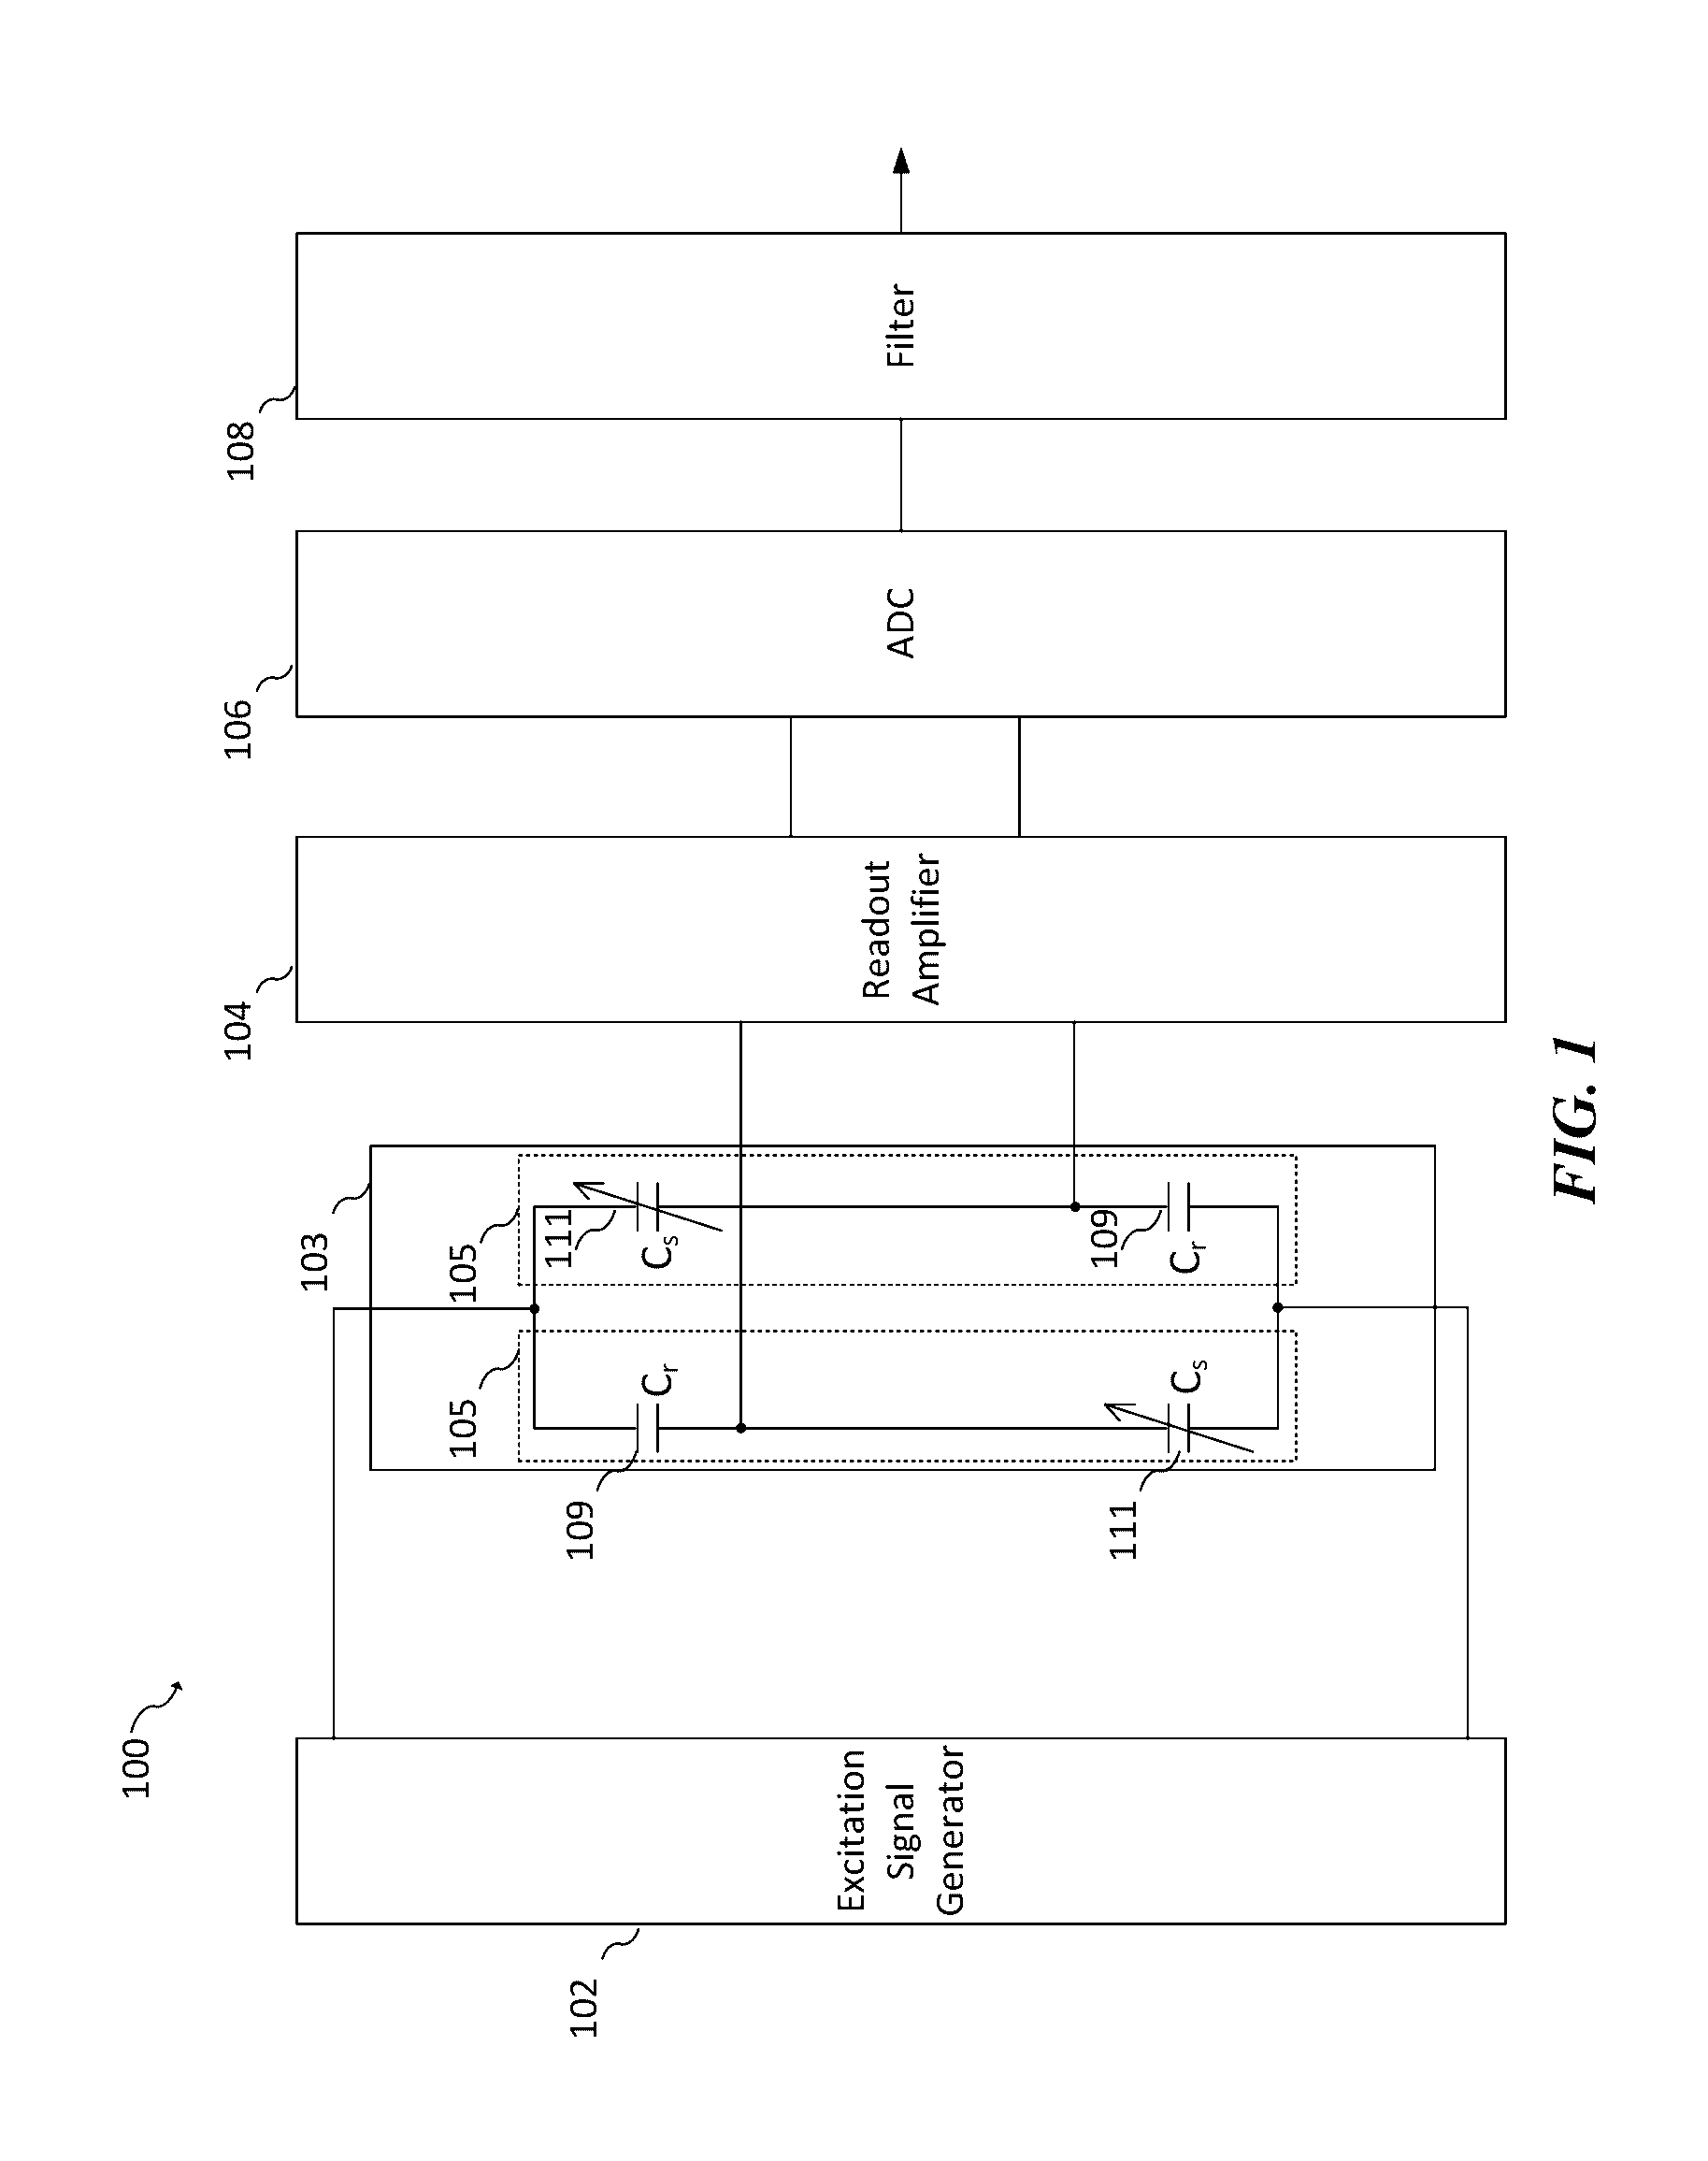 System and Method for a Capacitive Sensor